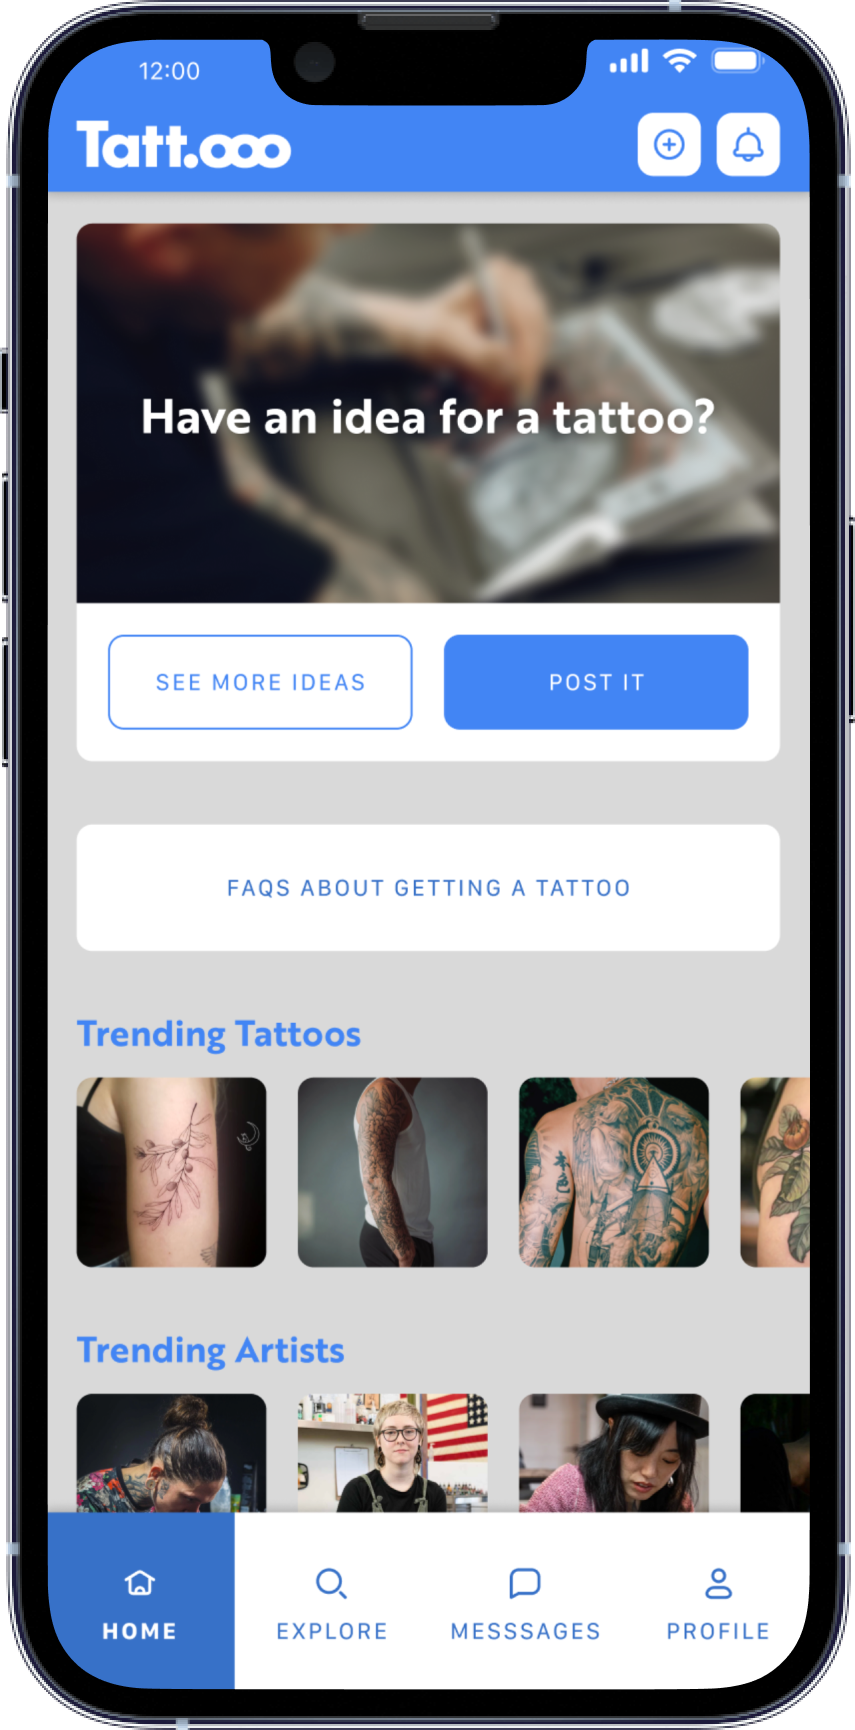 A preview image showing a variety of iPhone app mockups from the Tattooo project.